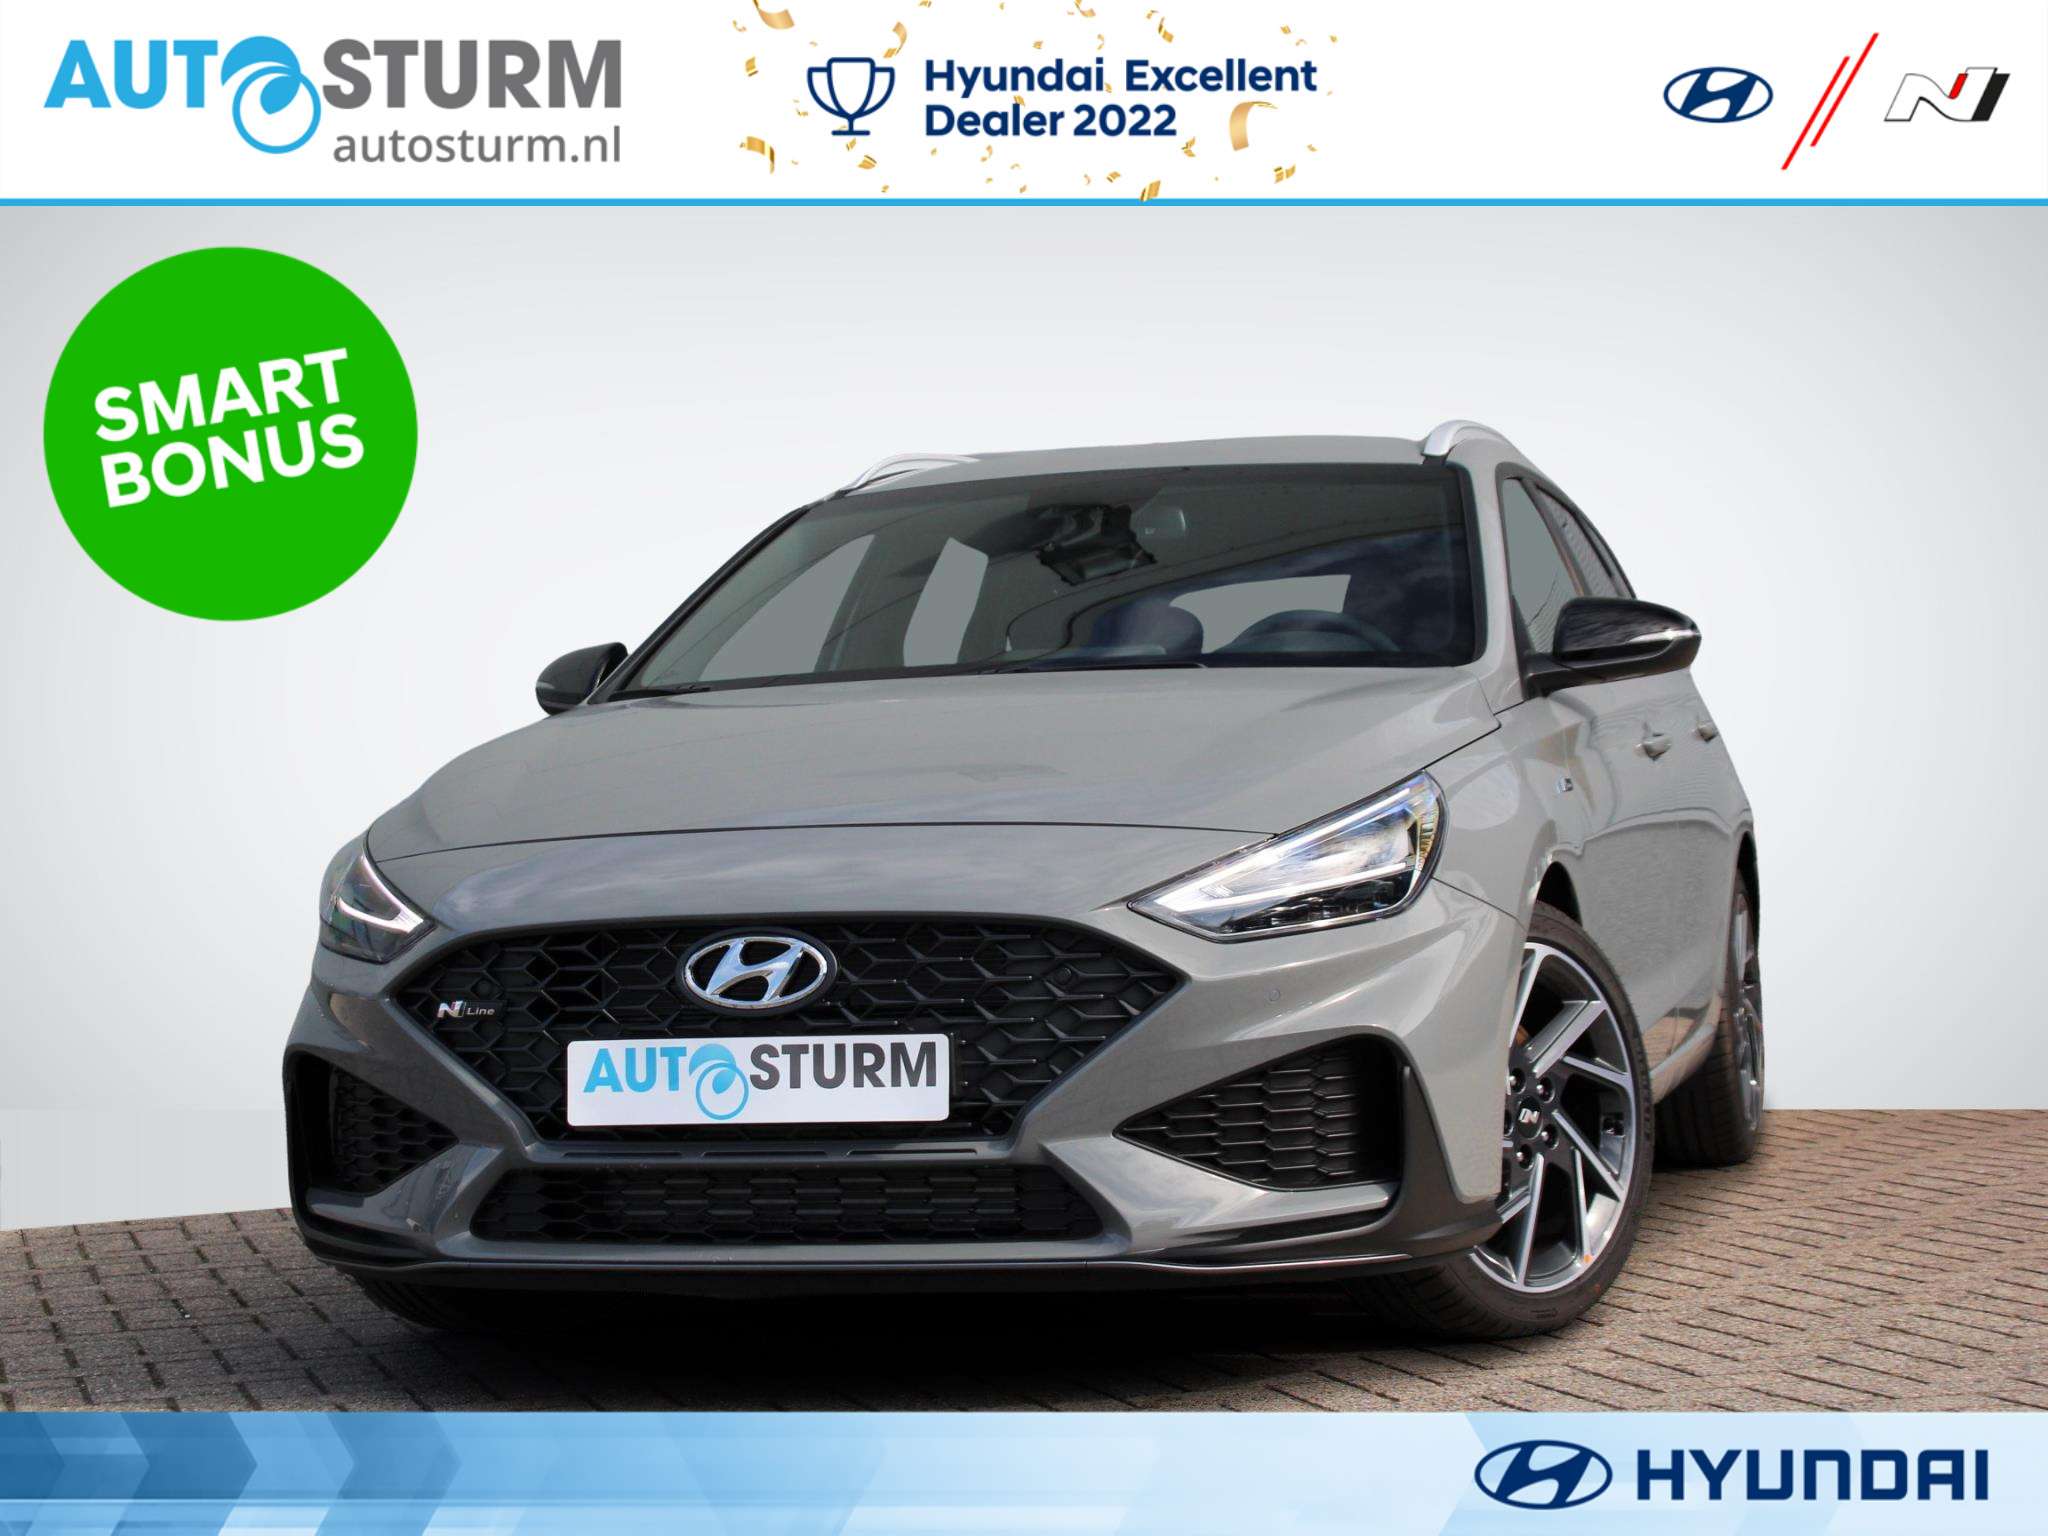 Hyundai i30 Station wagon in Grey pre-registered in GOES for € 35,705.-